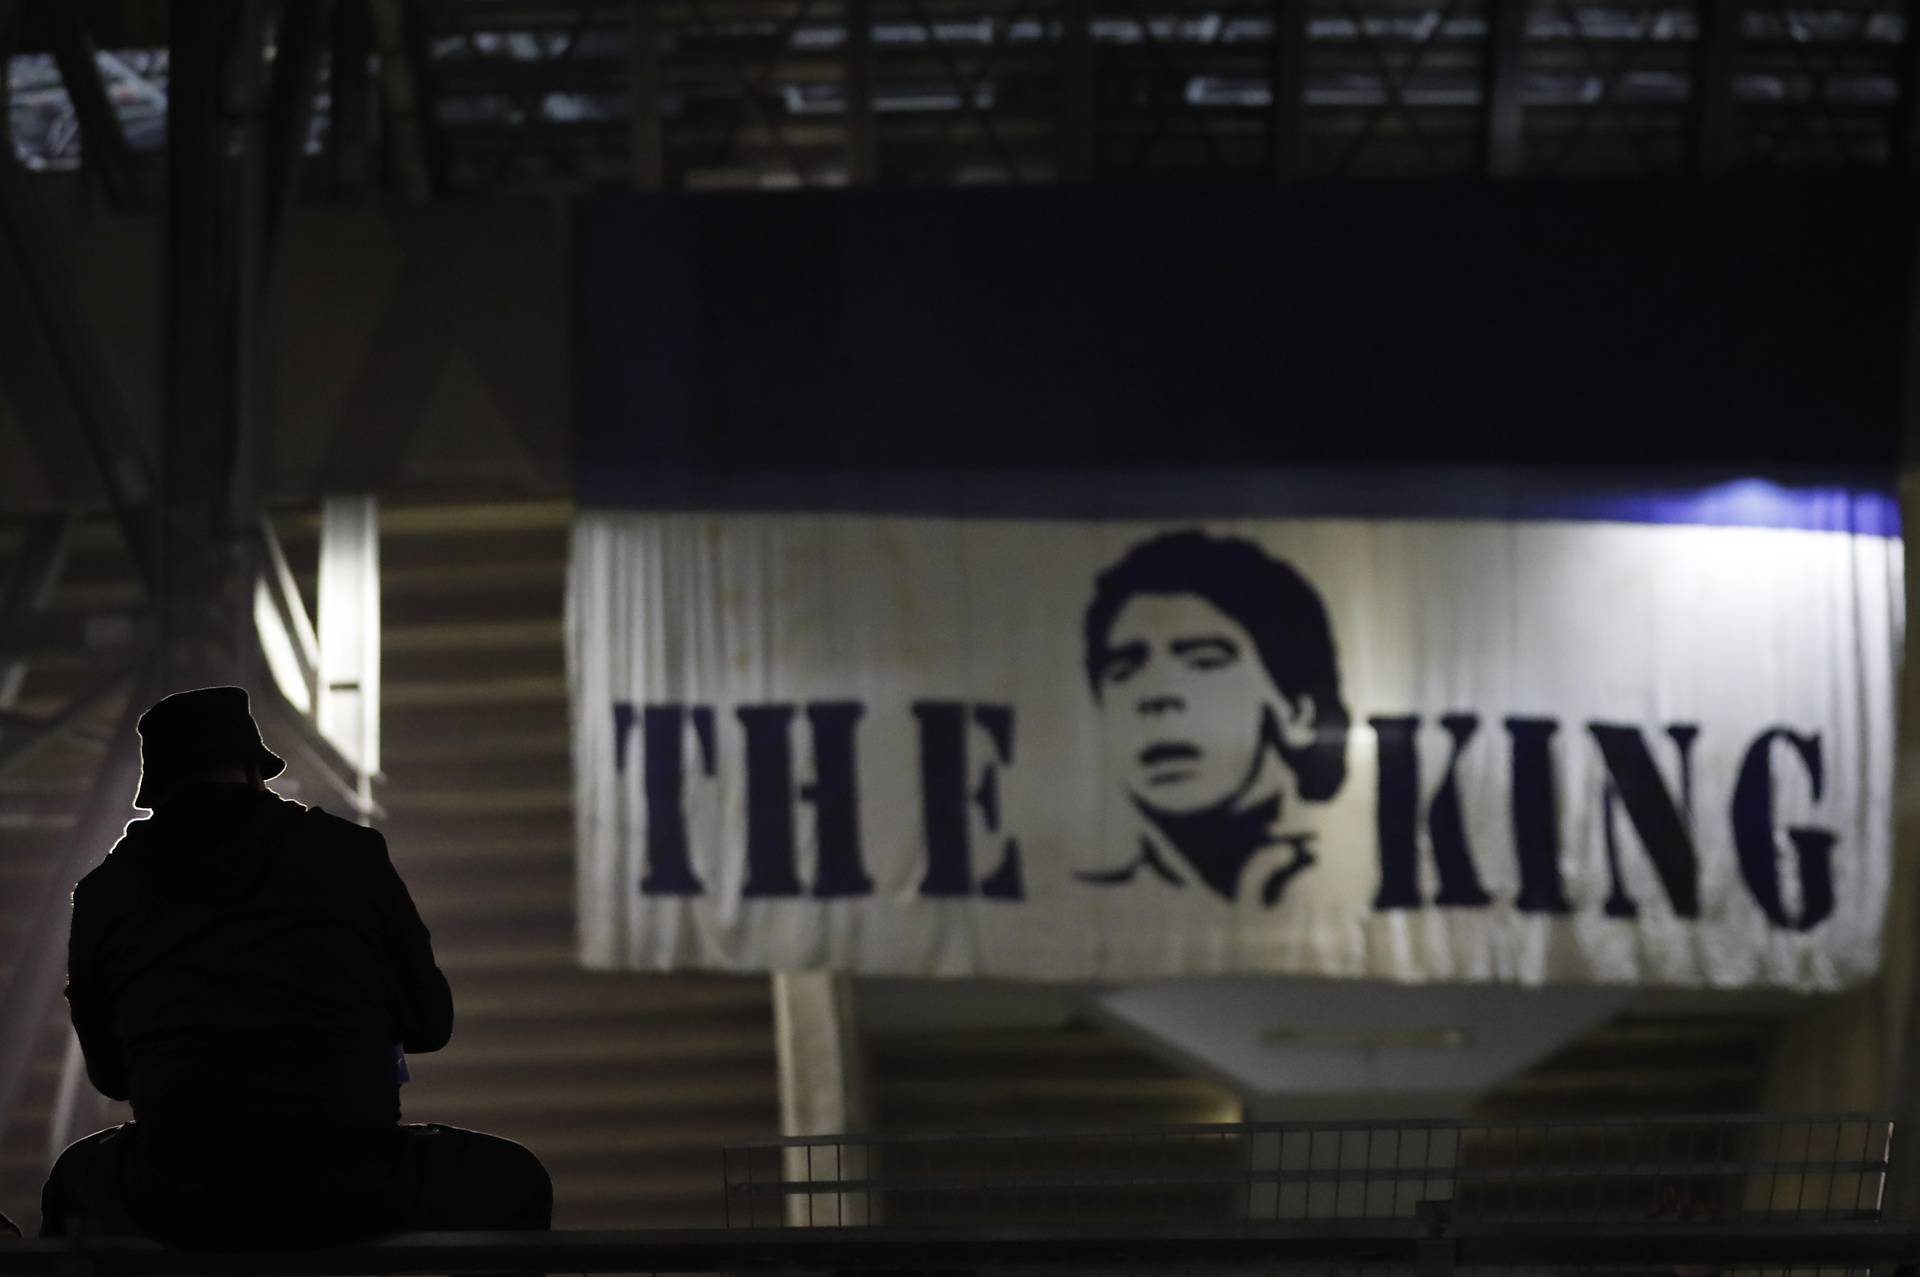 People mourn the death of Argentine soccer legend Diego Maradona, in Naples